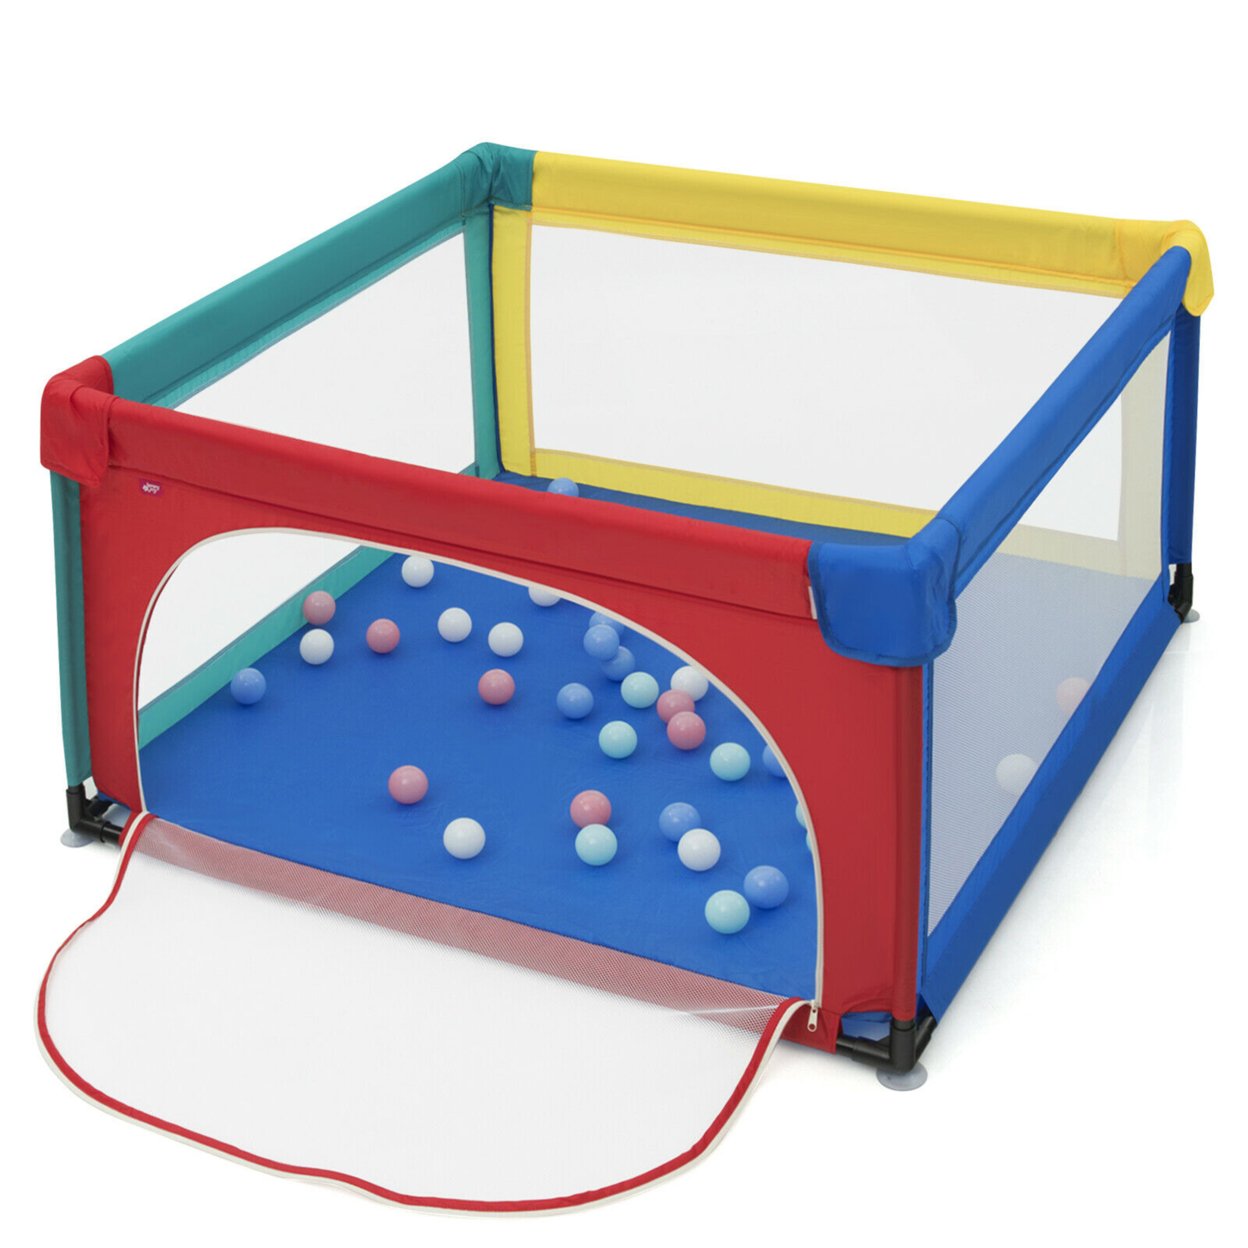 Gymax Baby Playpen Infant Large Safety Play Center Yard w/ 50 Ocean Balls Multi-color